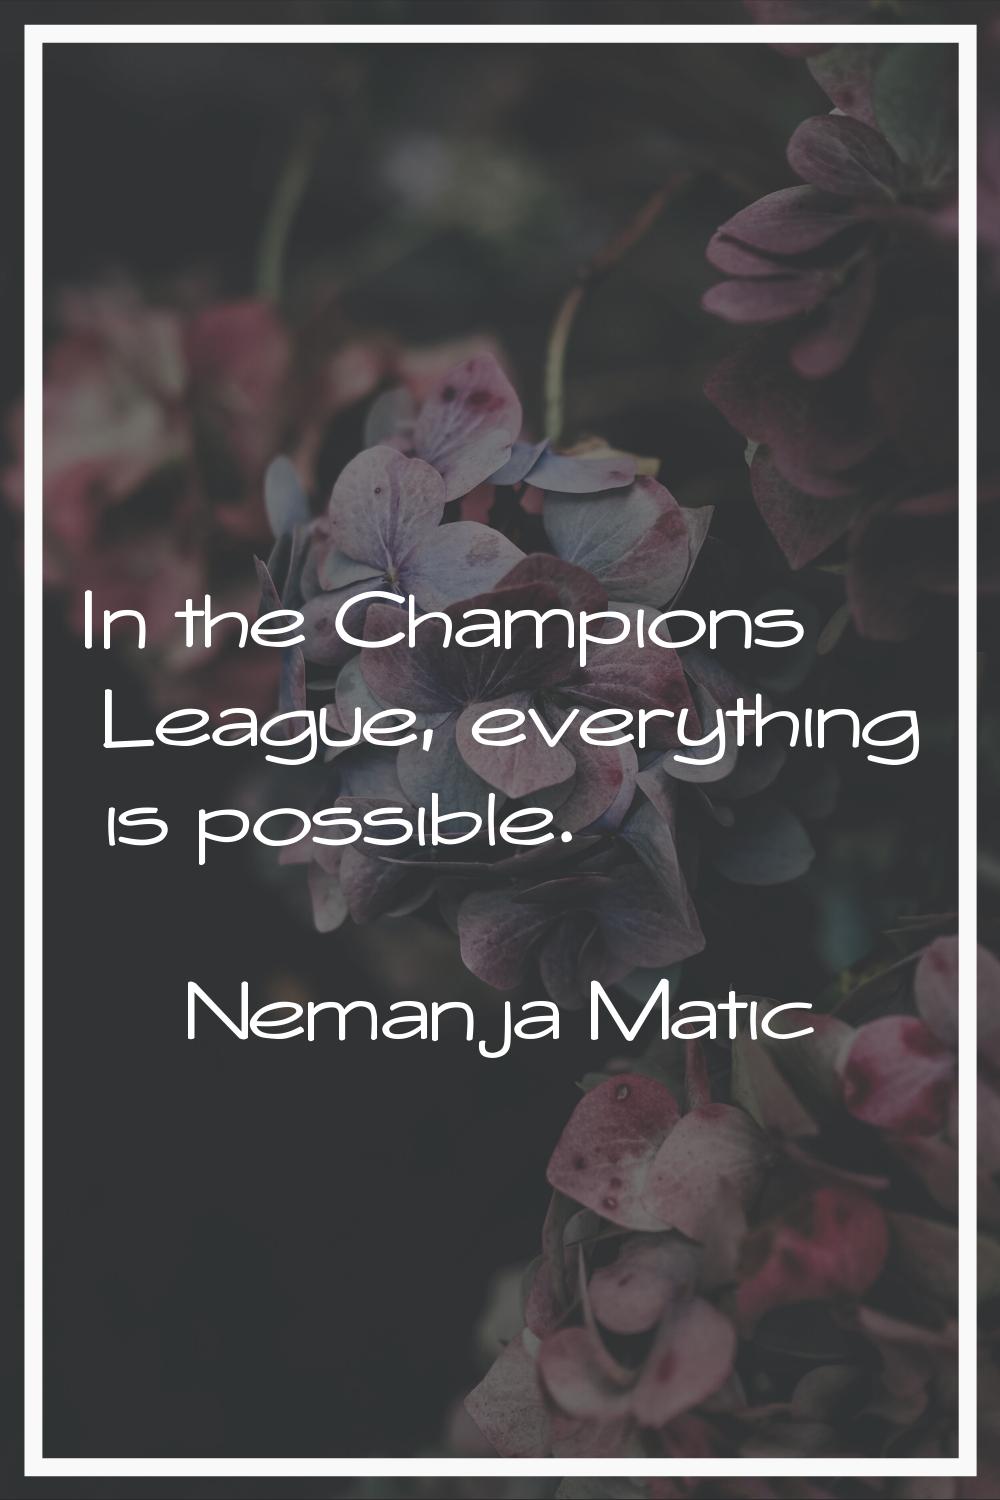 In the Champions League, everything is possible.